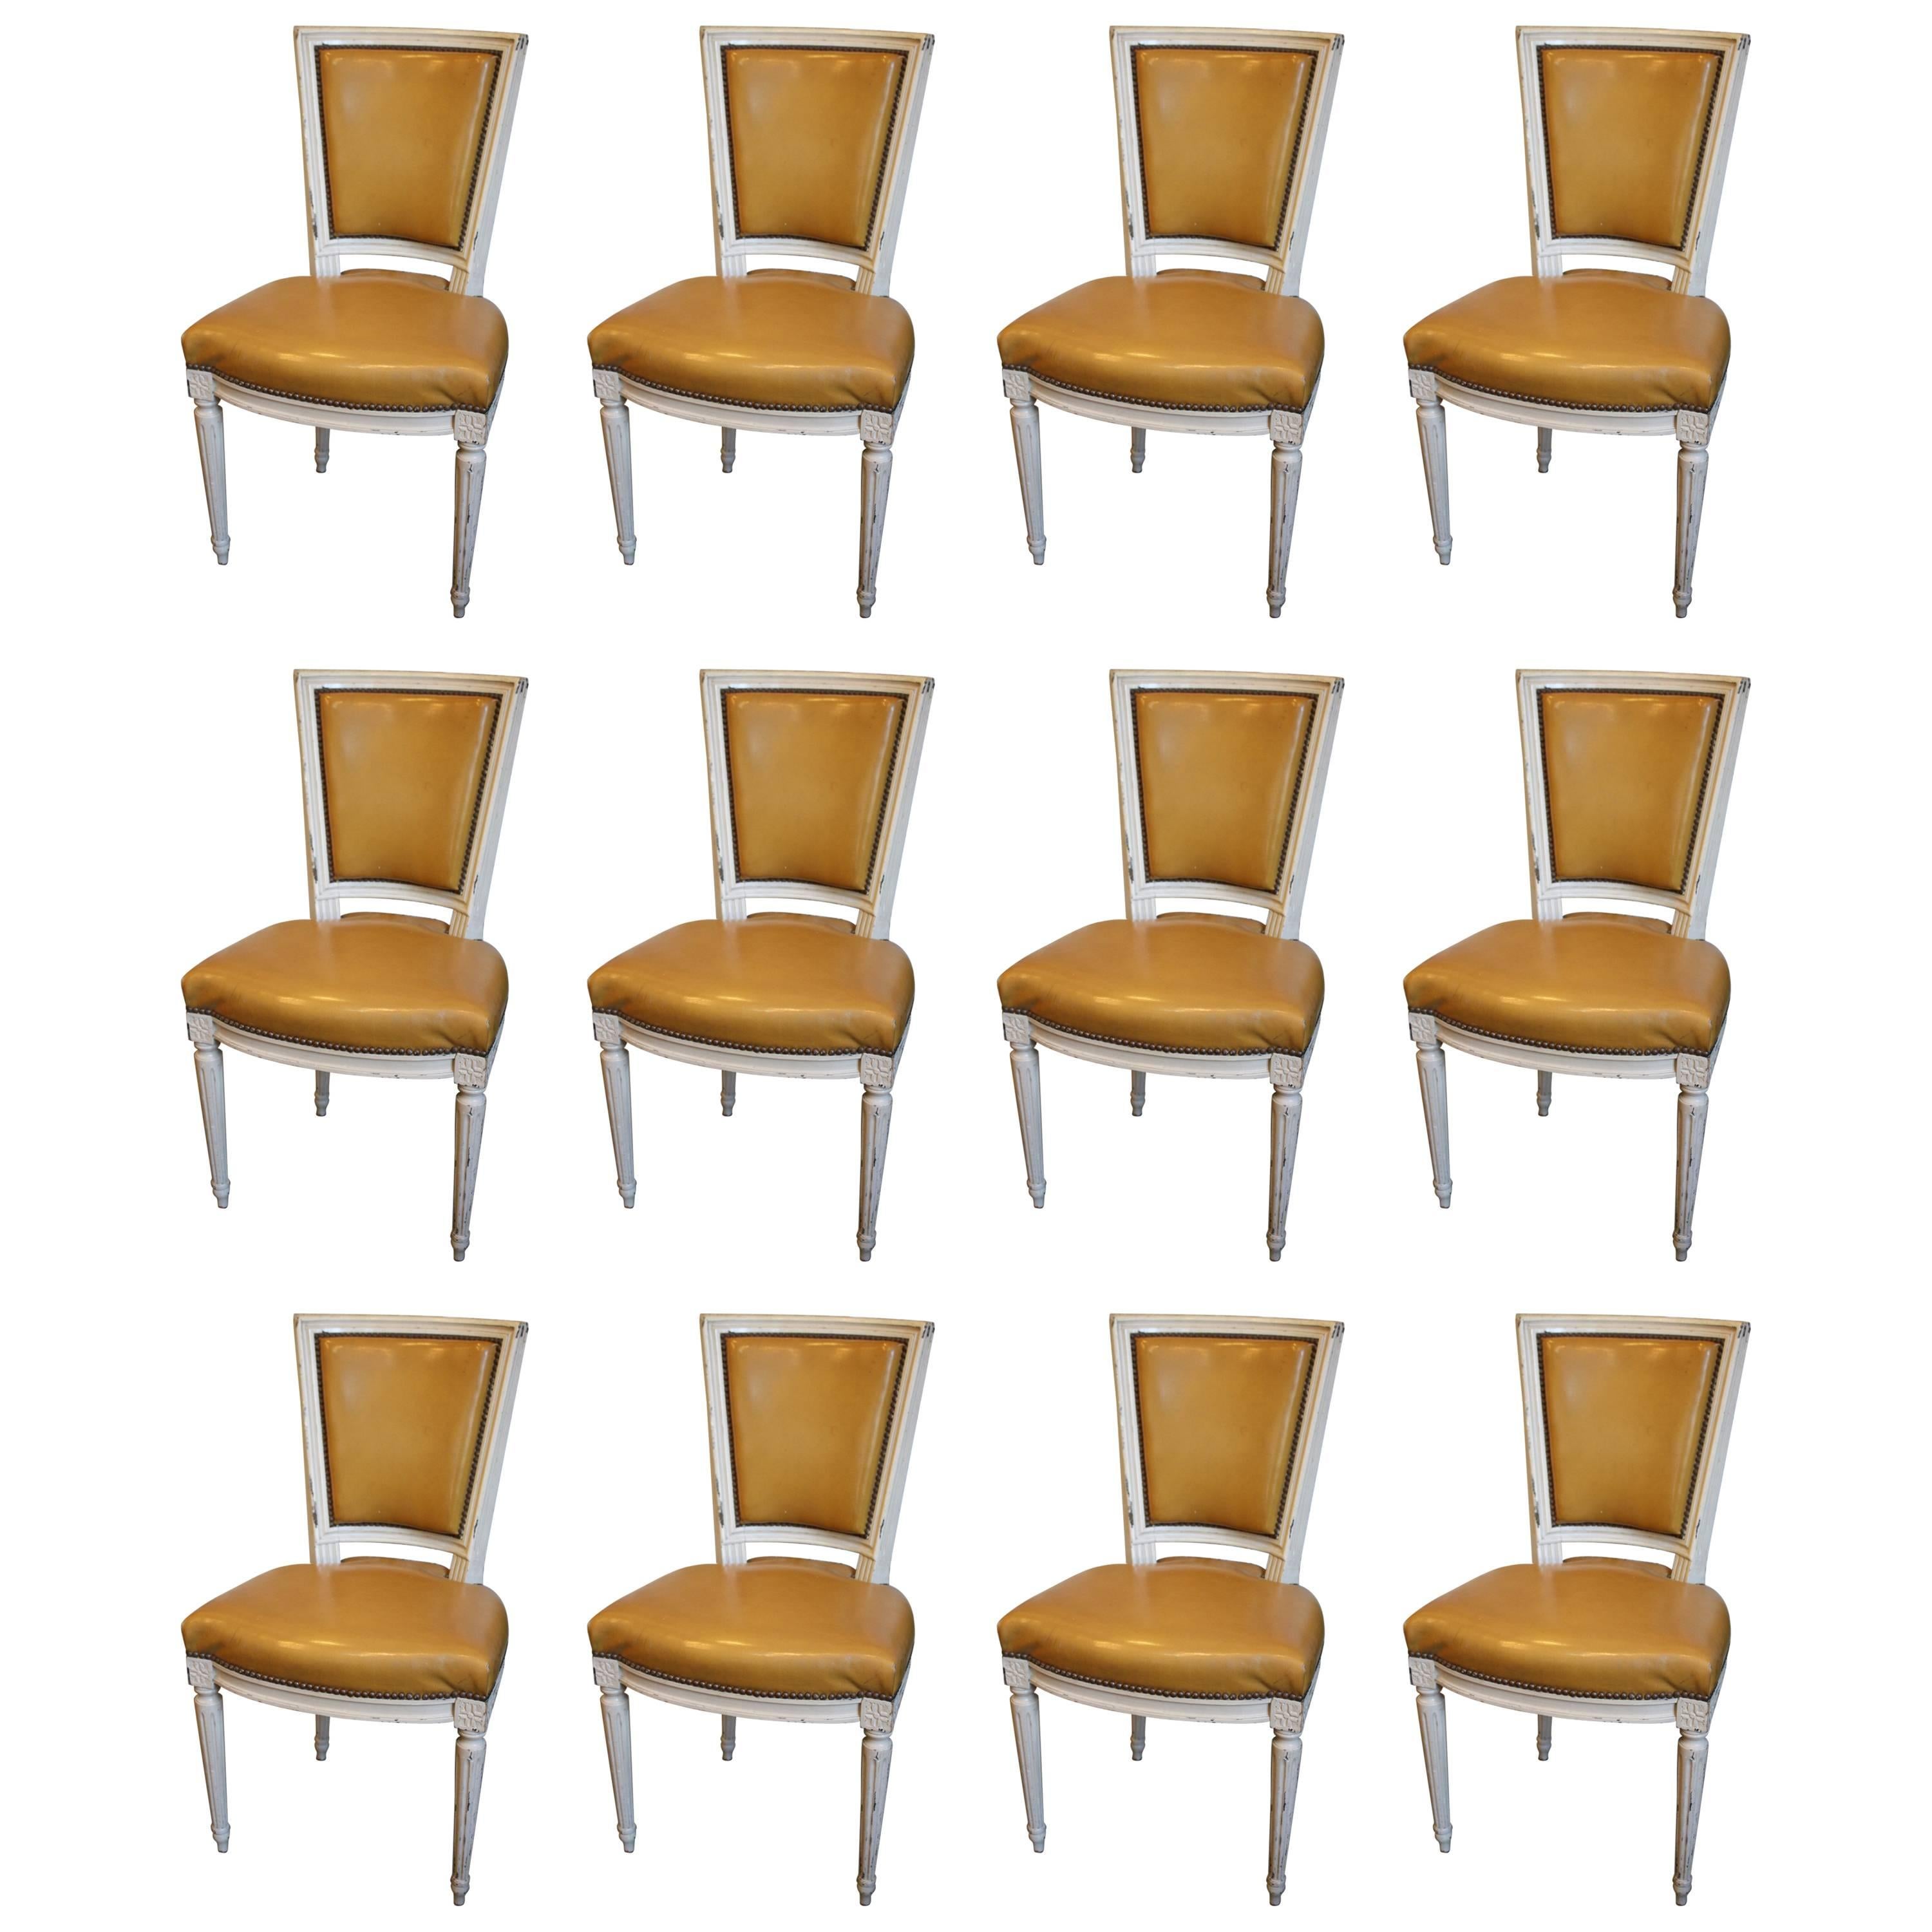 12 Louis XVI Style French Dining Chairs in Original Paint and Leather